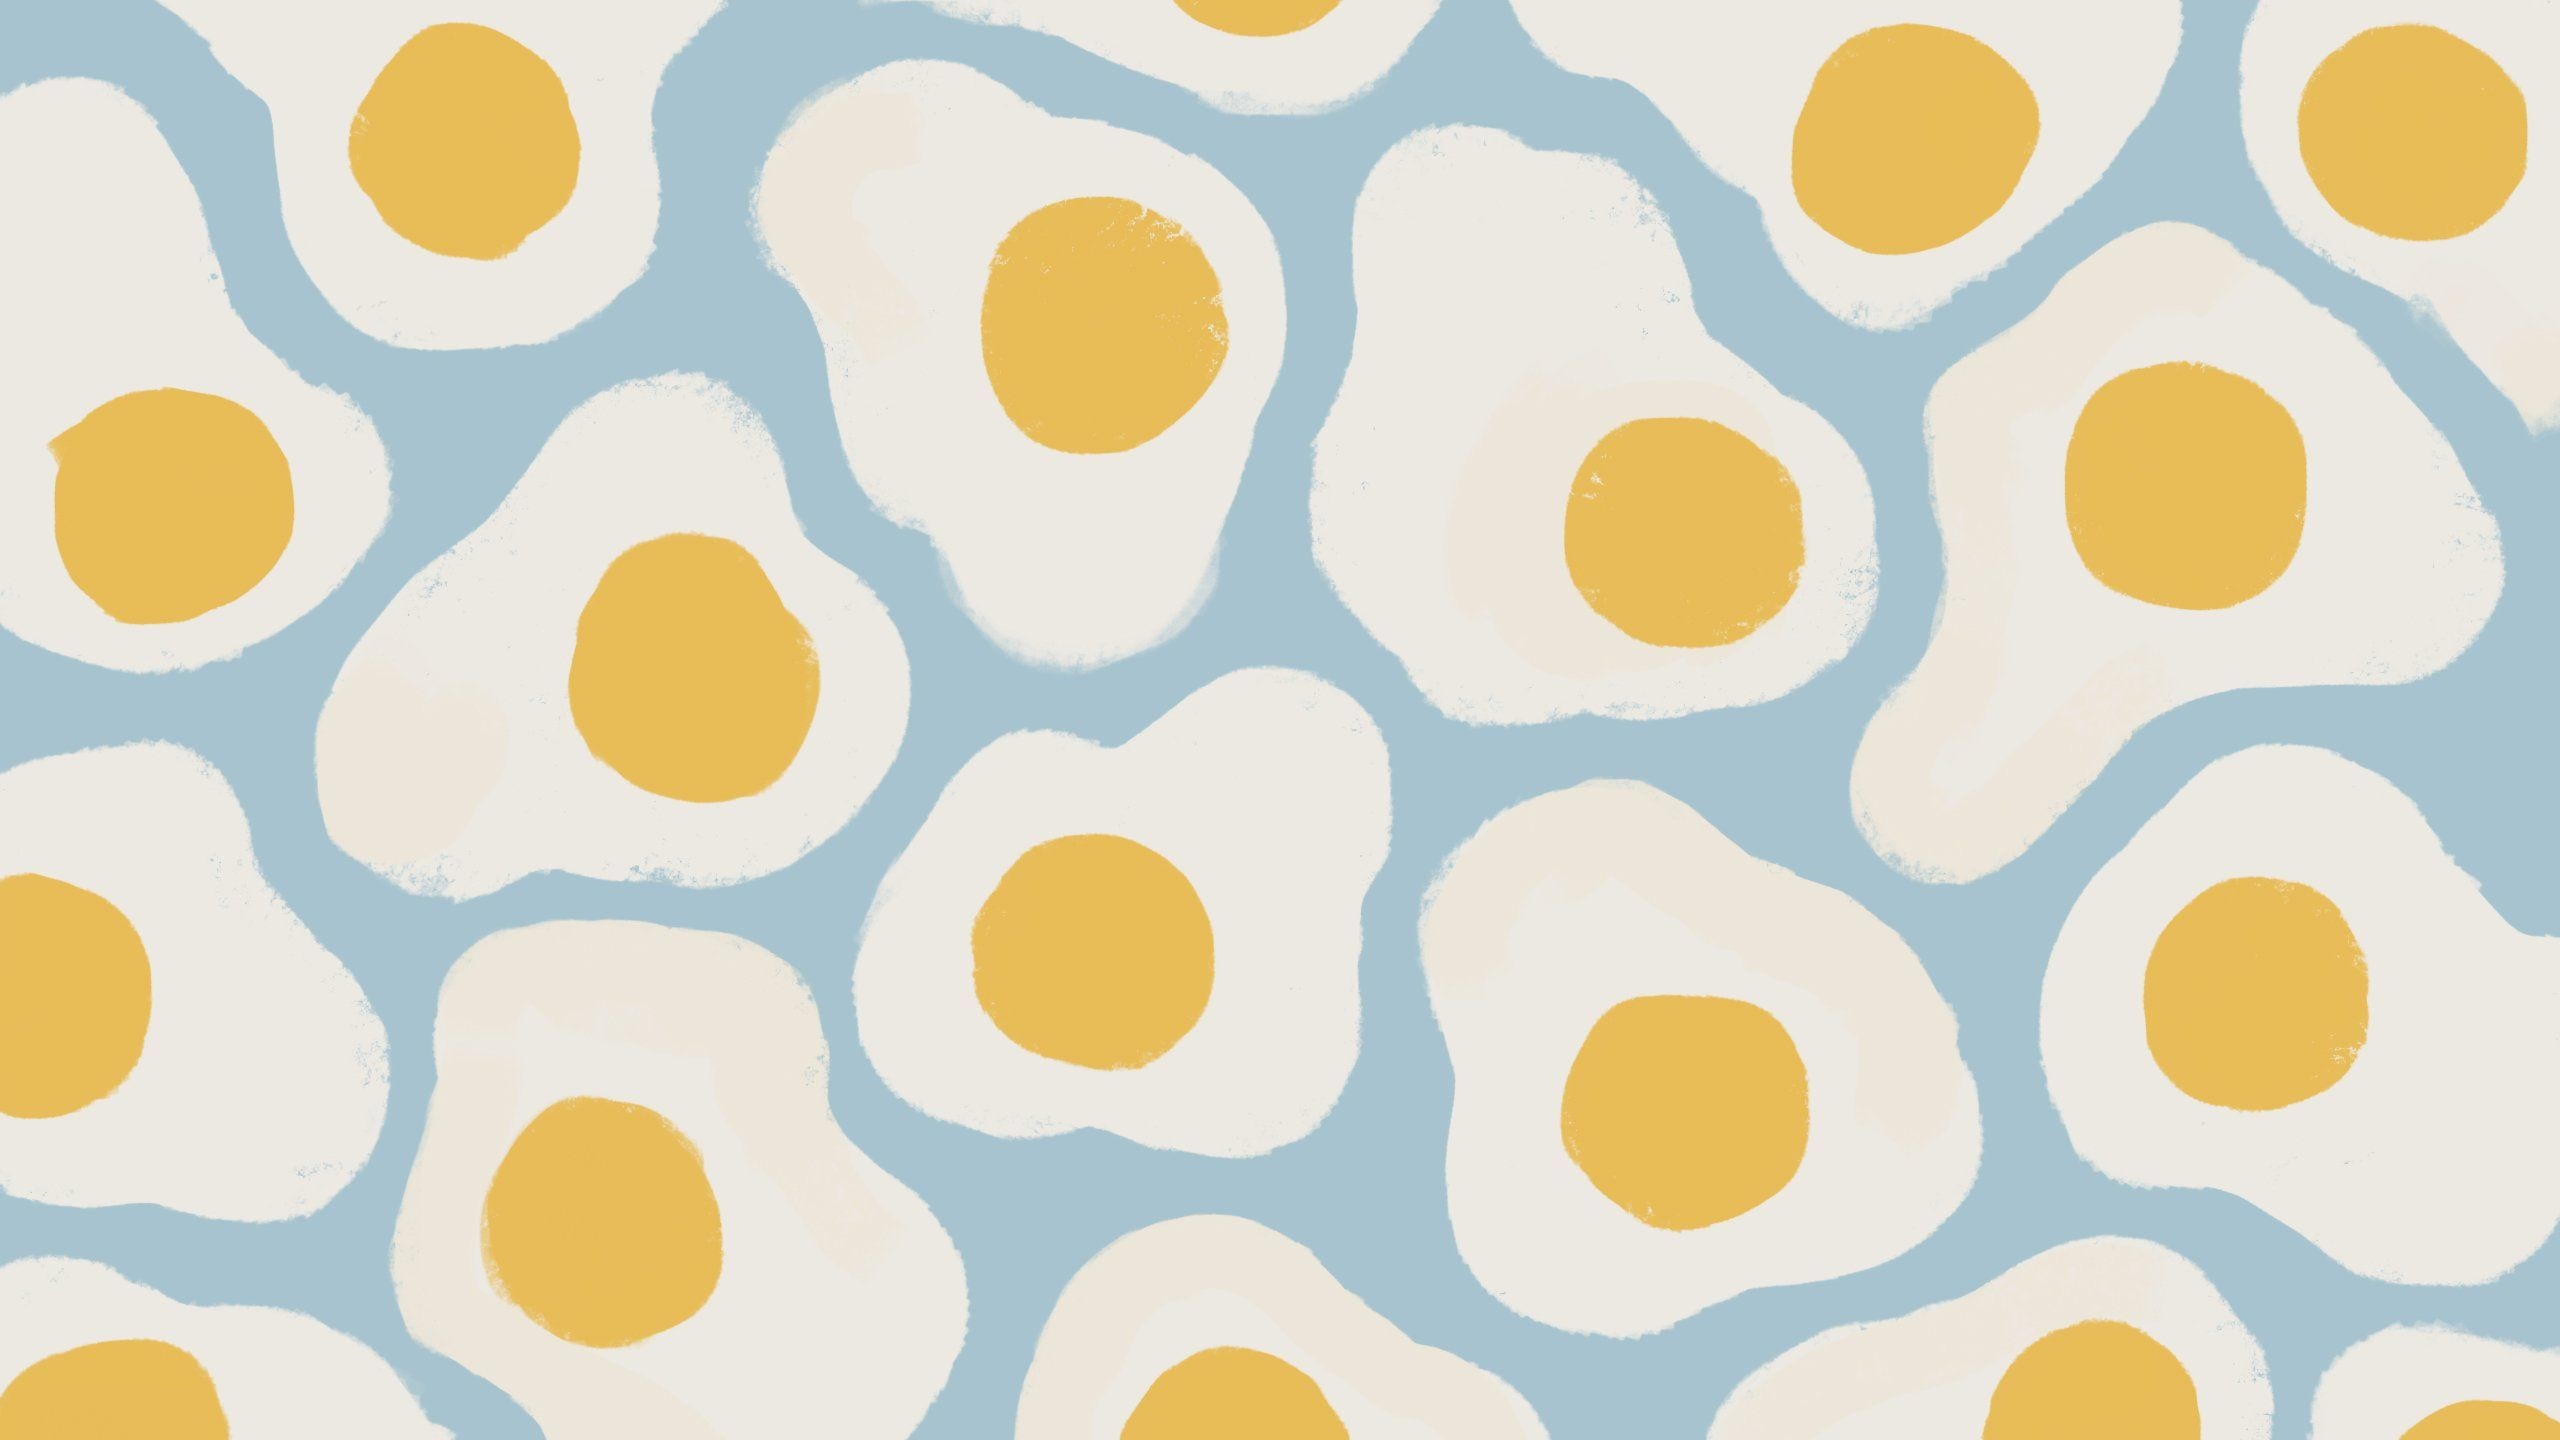 Eggs Photos Download The BEST Free Eggs Stock Photos  HD Images